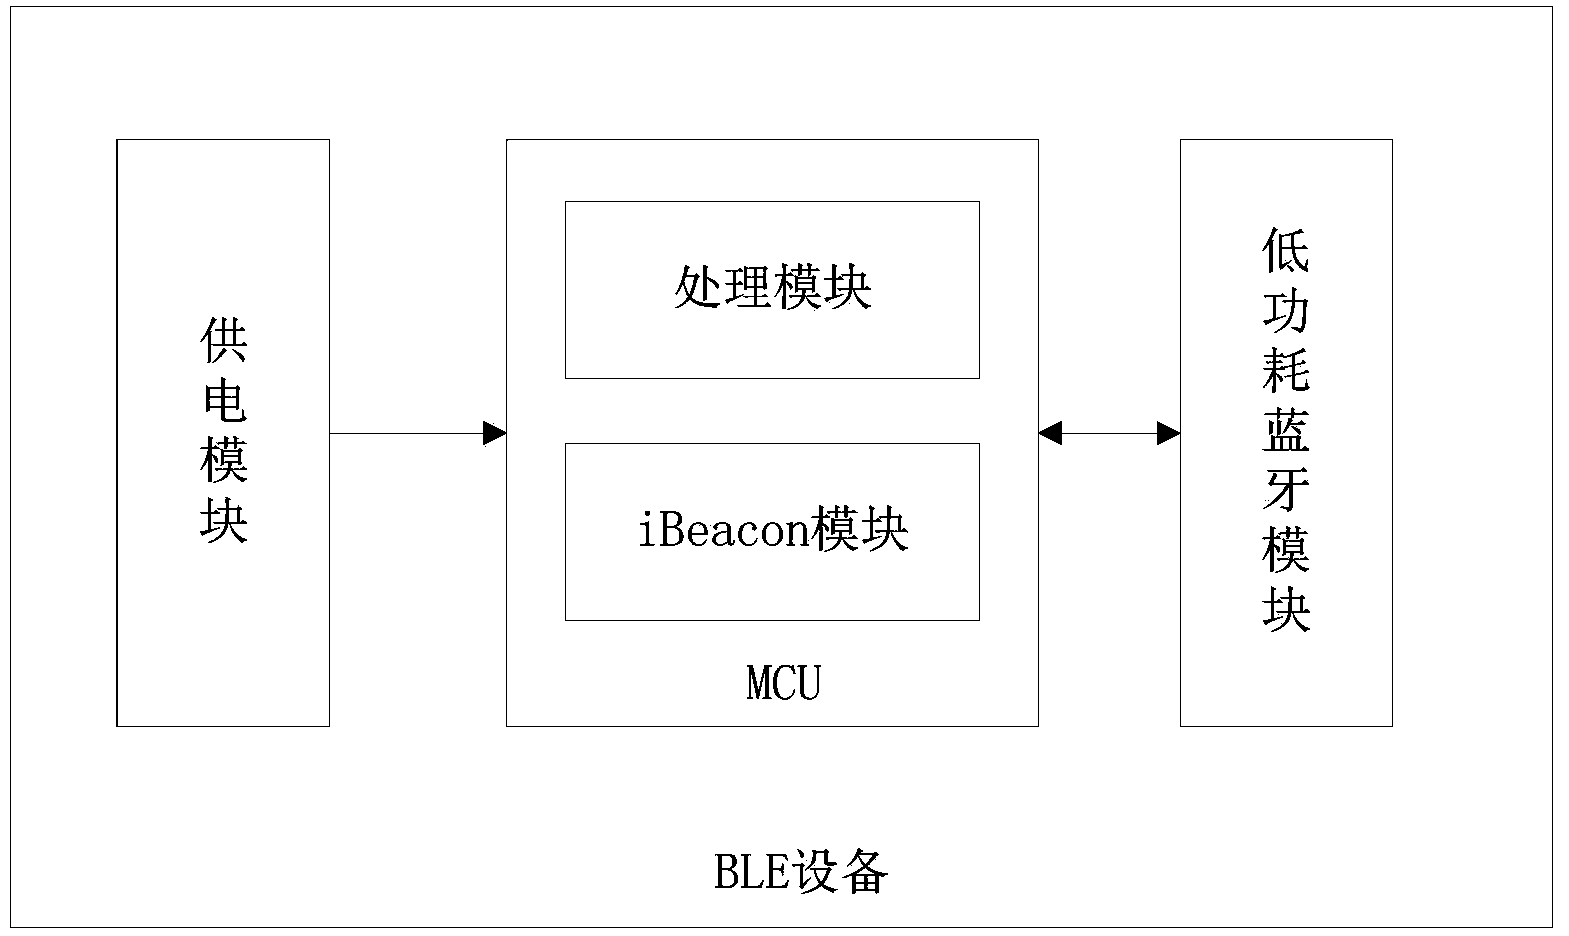 BLE (Bluetooth Low Energy) device, information safety device and automatic start-up method of application program